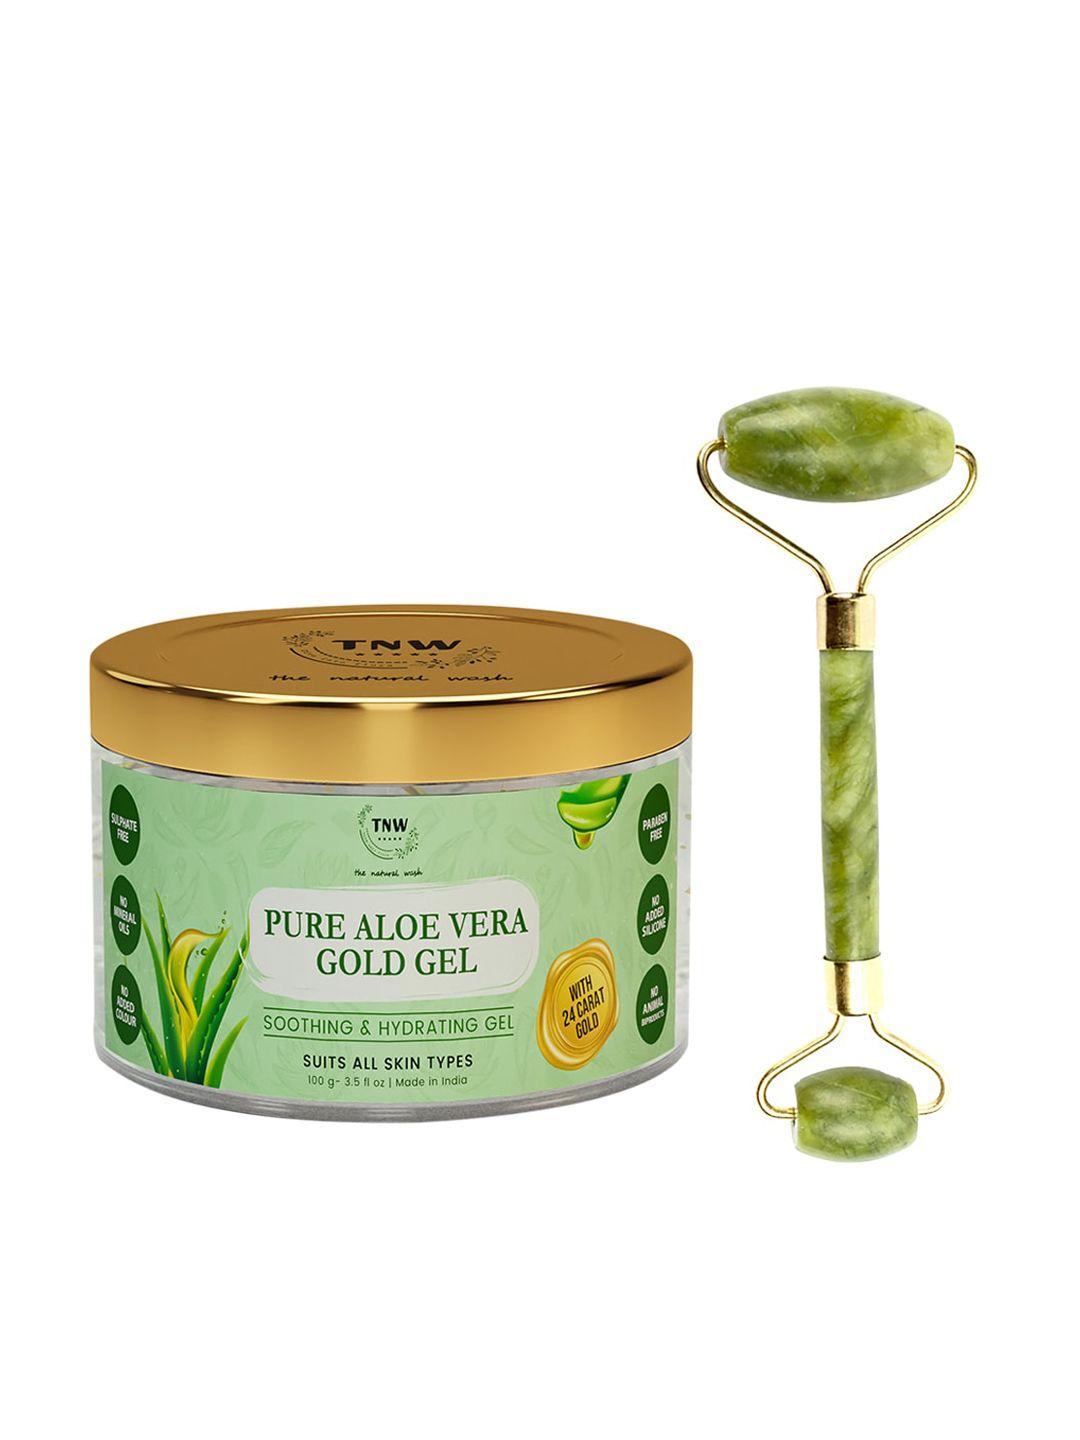 tnw the natural wash pure aloe vera gold gel with jade roller - 100 g